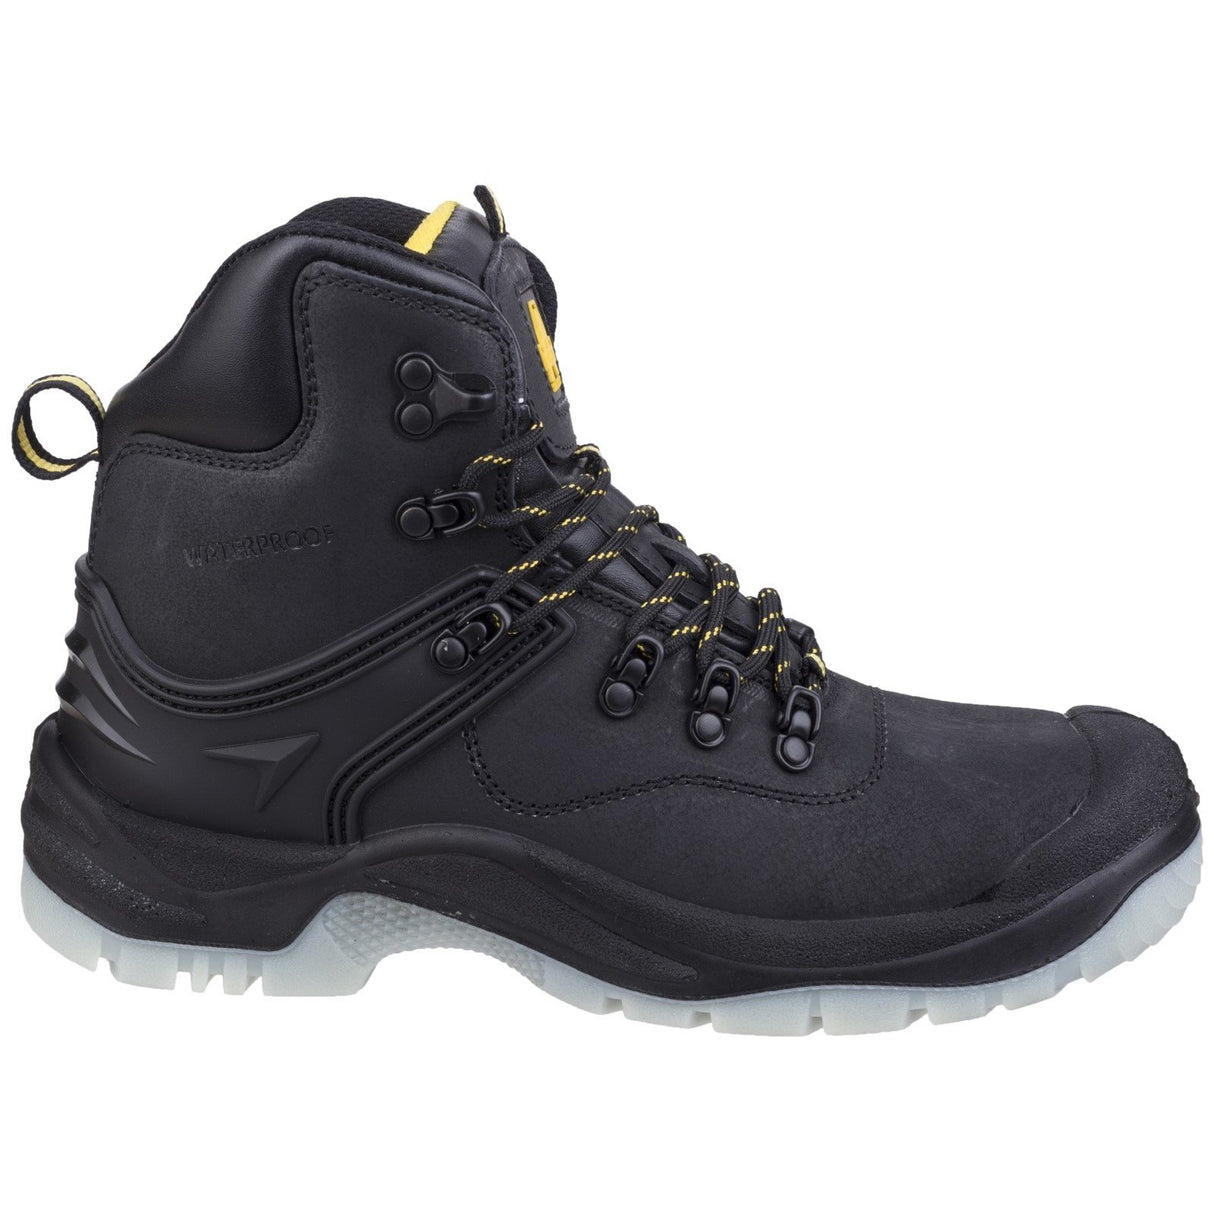 Amblers Safety Waterproof Soft Lining Safety Boots